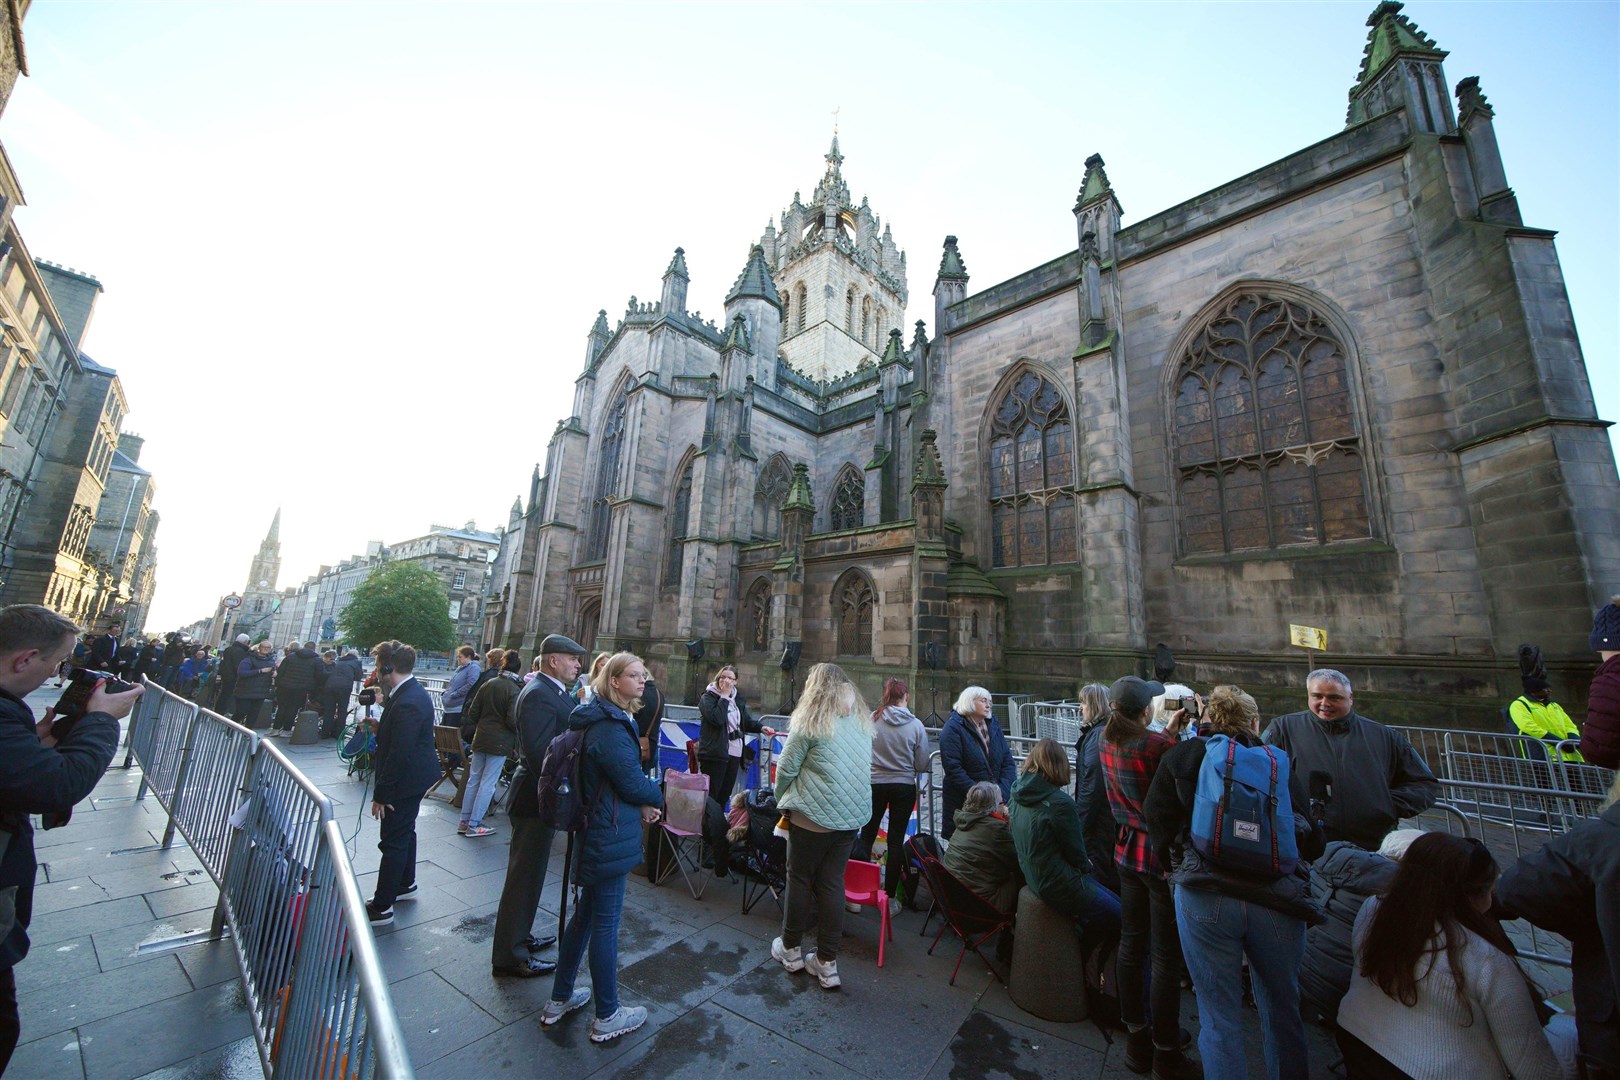 People gather outside St Giles’ Cathedral in Edinburgh ahead of the Procession of Queen Elizabeth’s coffin from the Palace of Holyroodhouse to the cathedral (Peter Byrne/PA)